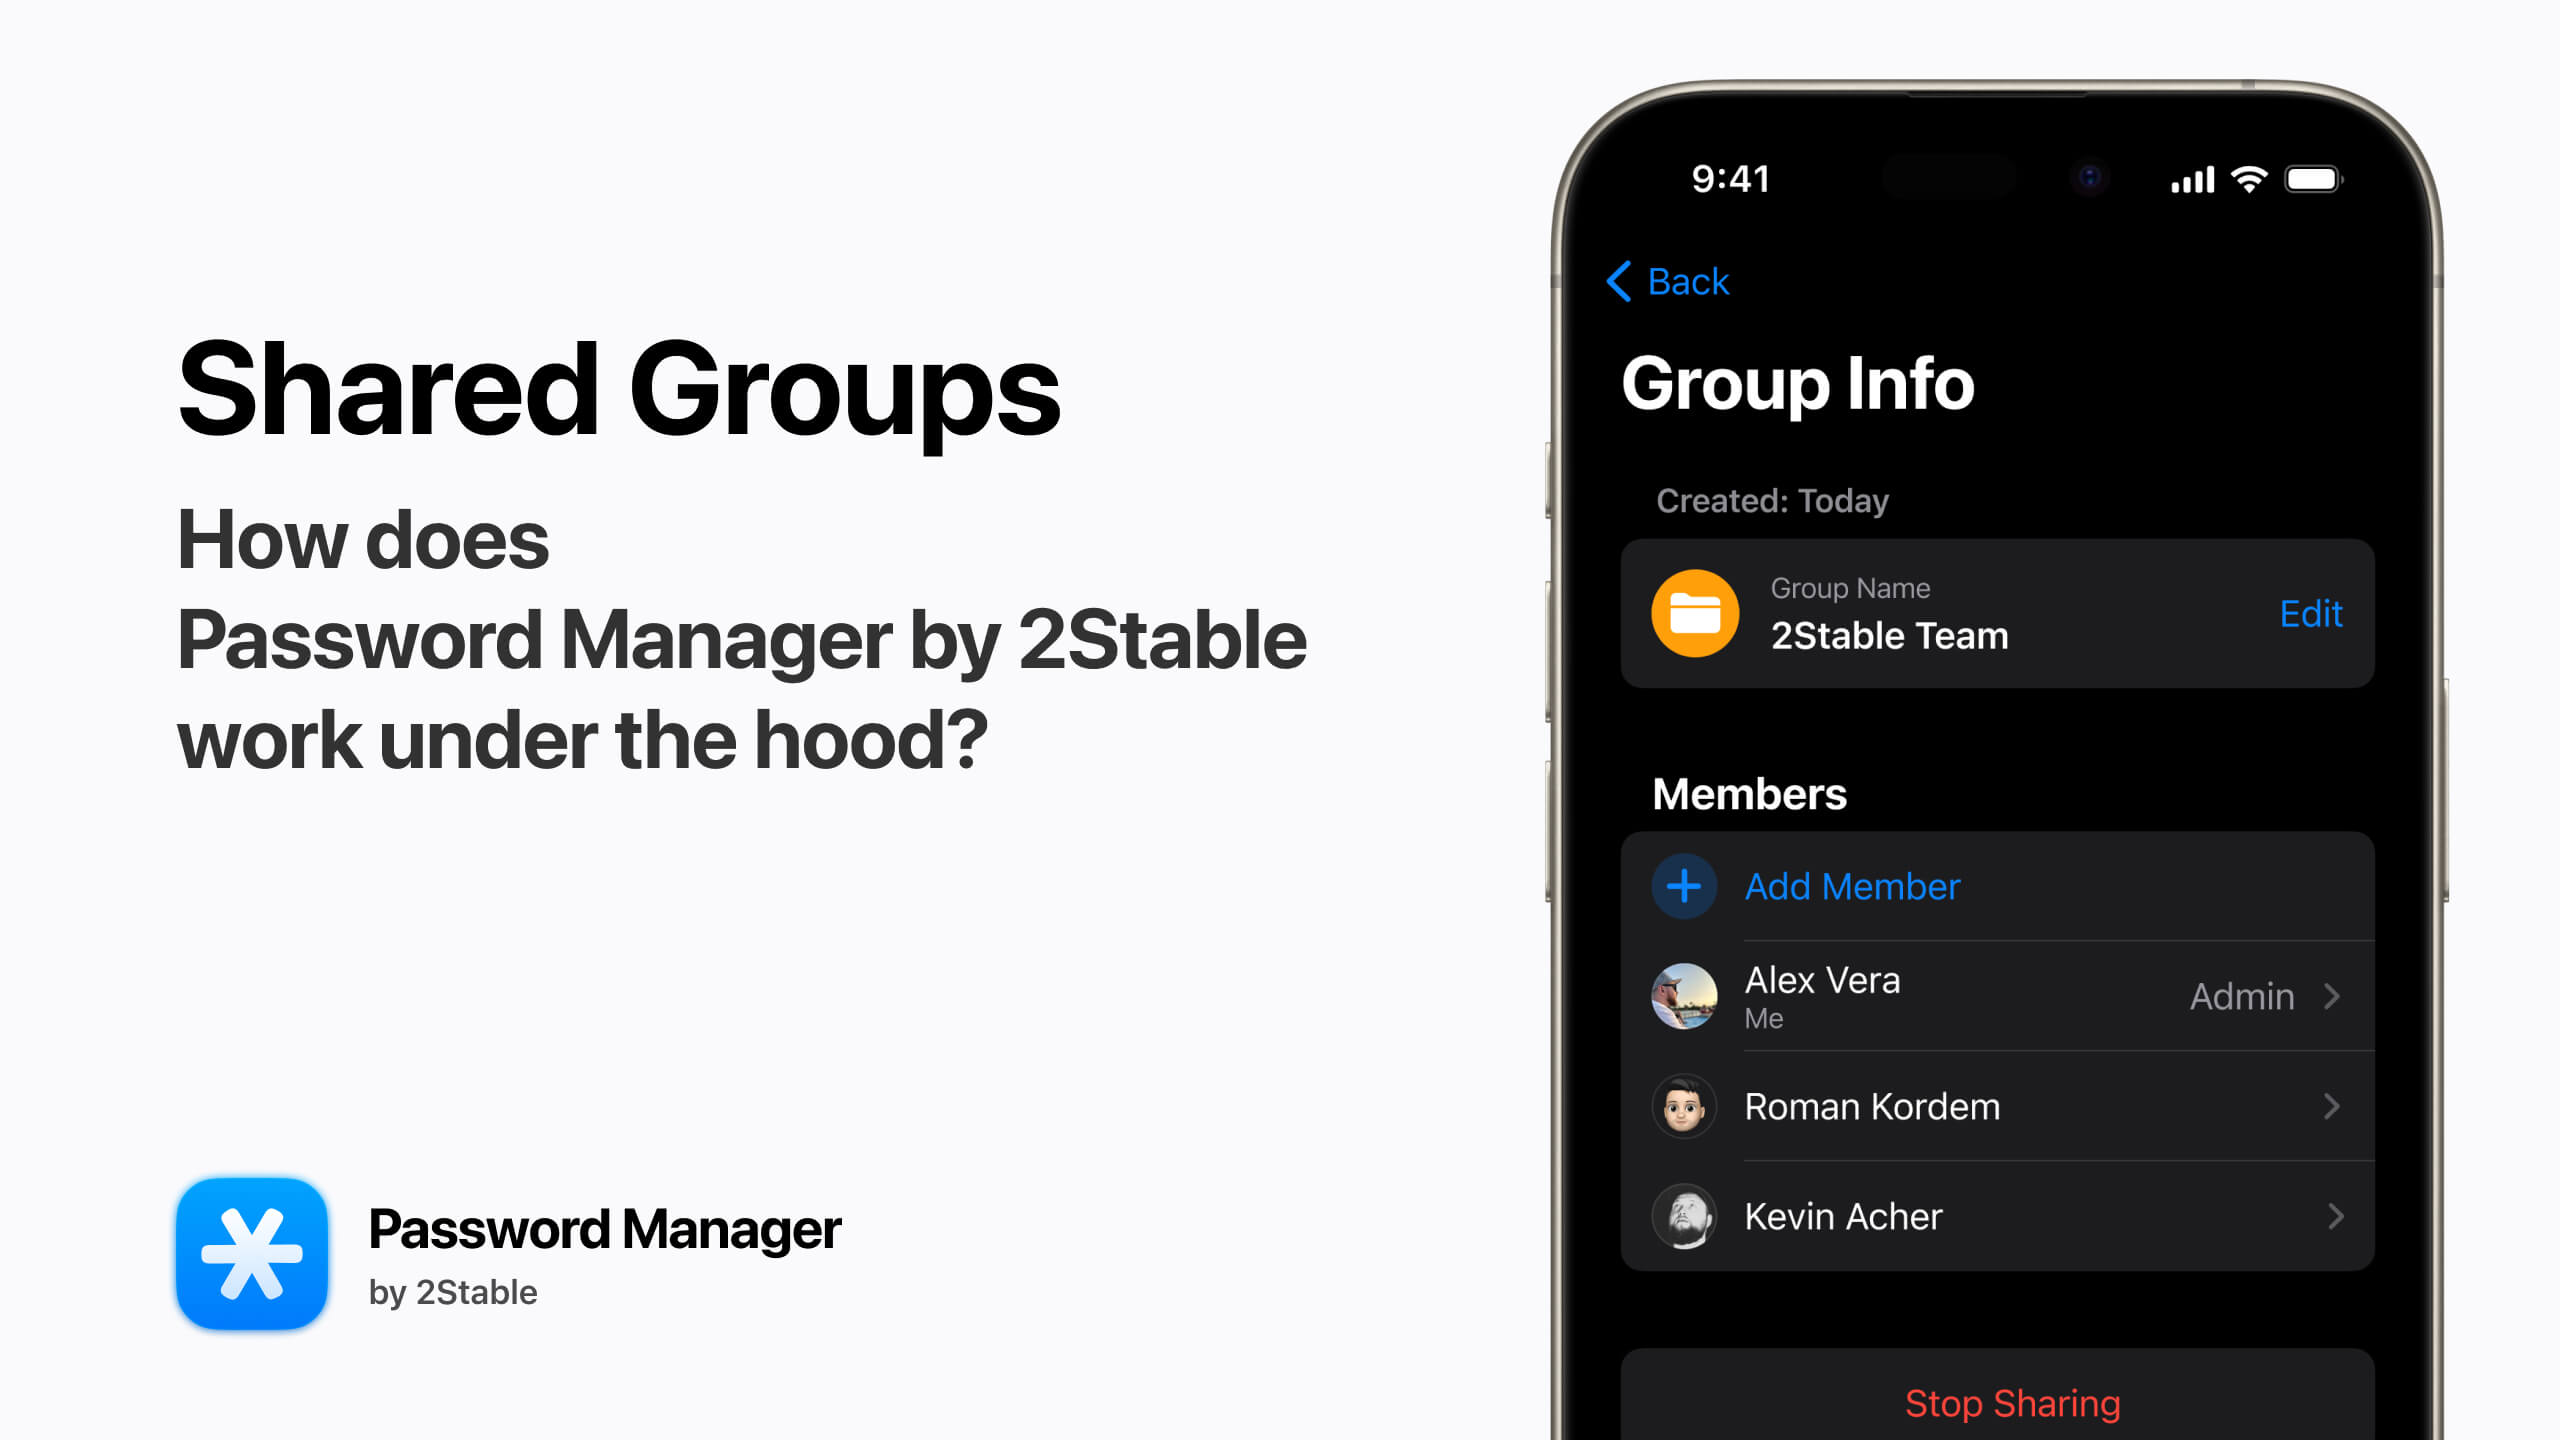 How does Password Manager by 2Stable work under the hood? Part 3, The Shared Groups.